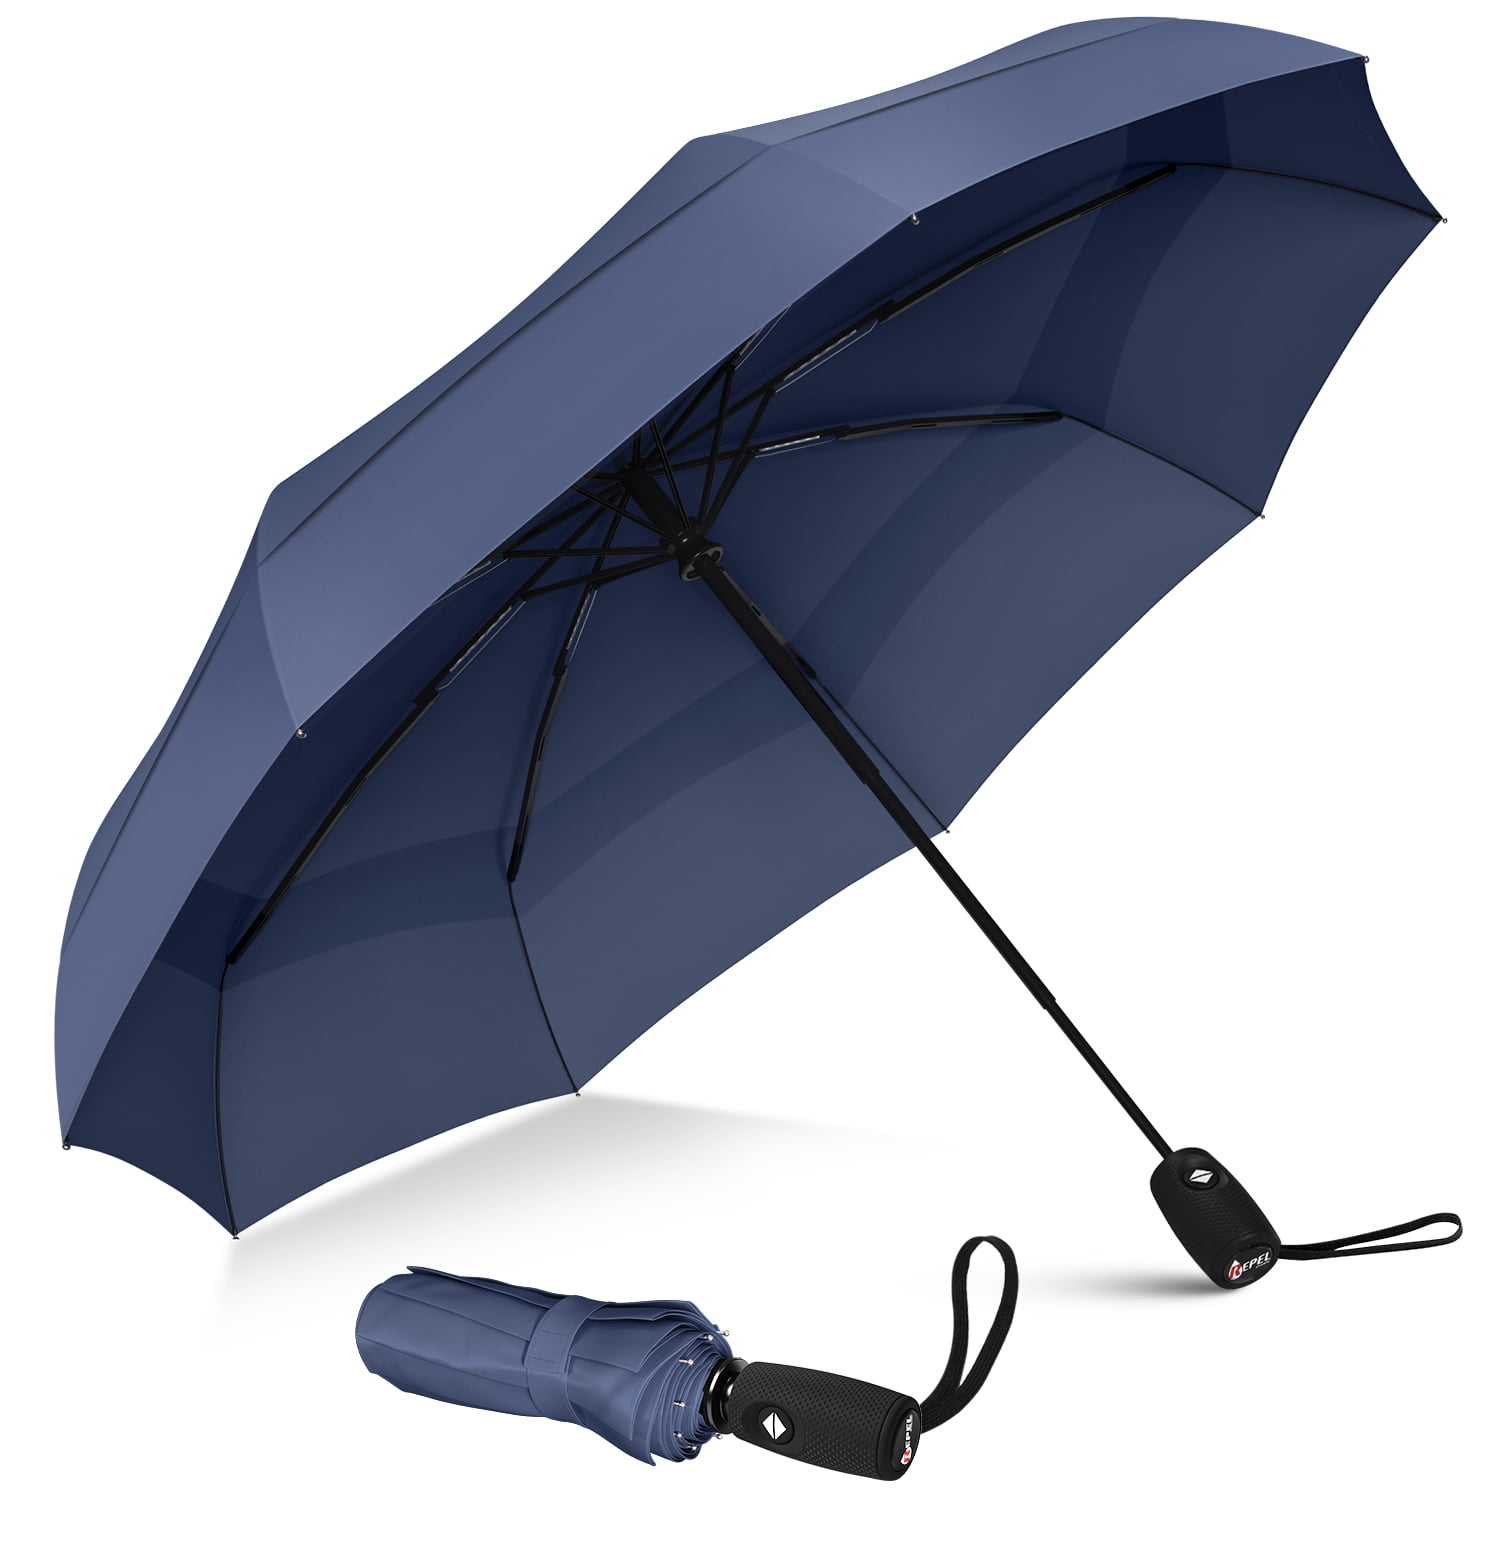 Strong and Portable Automatic Folding Small Umbrella for Rain 1 & 2 PCS Travel Umbrella Windproof Compact Collapsible Light Wind Resistant 